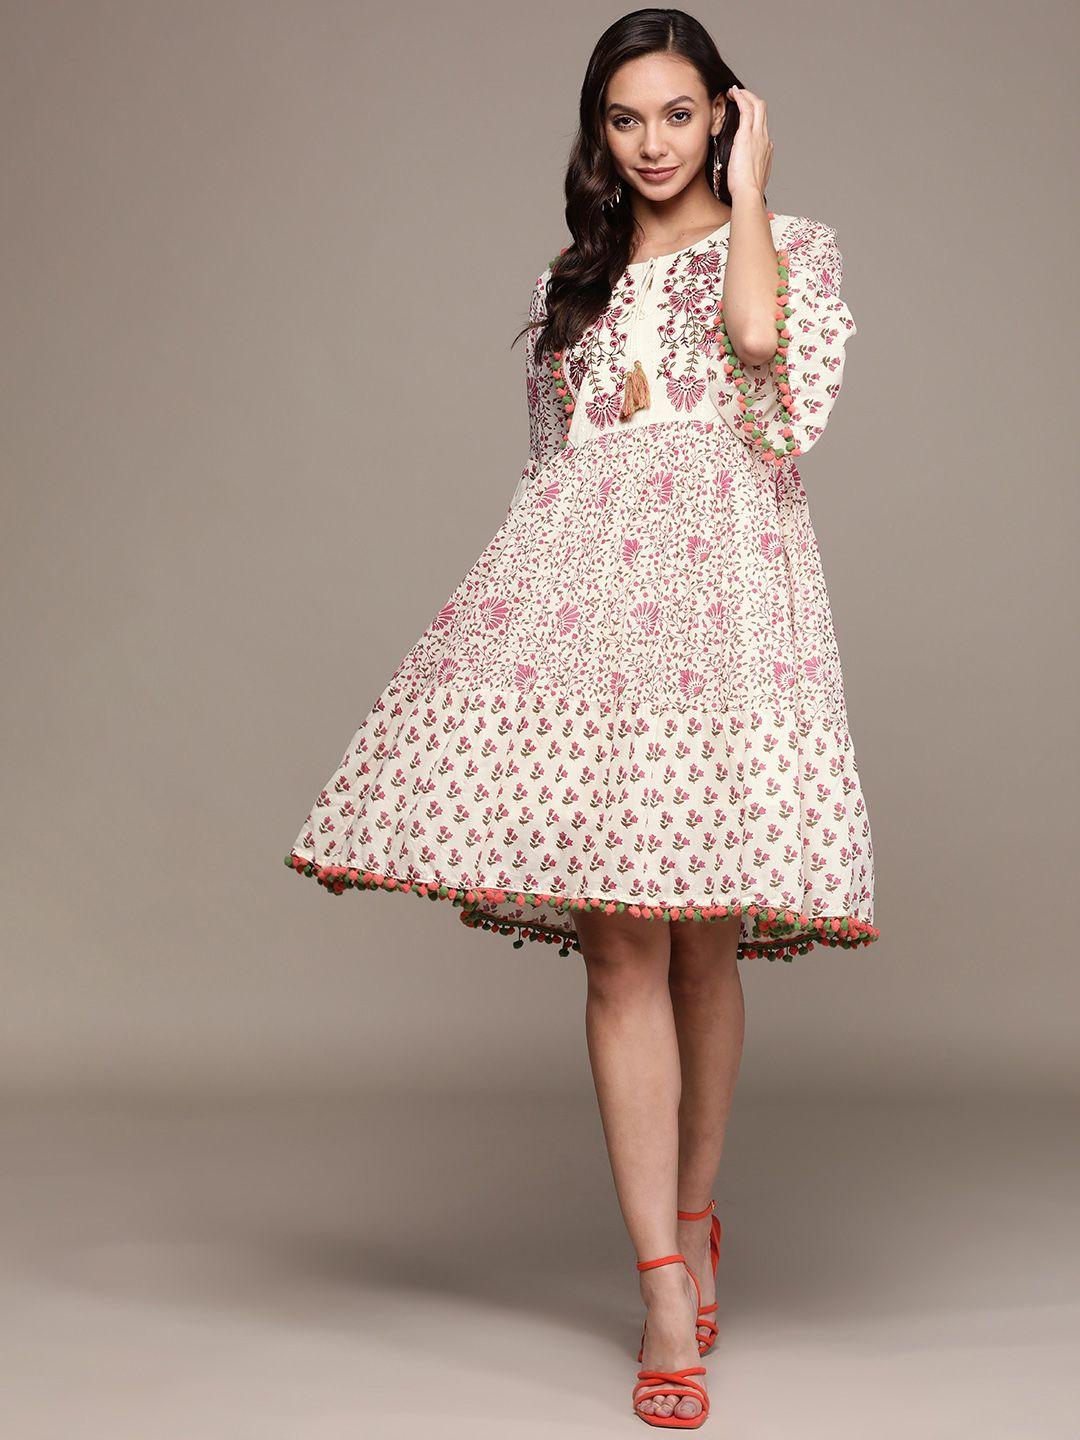 ishin-off-white-&-pink-floral-embroidered-tie-up-neck-a-line-dress